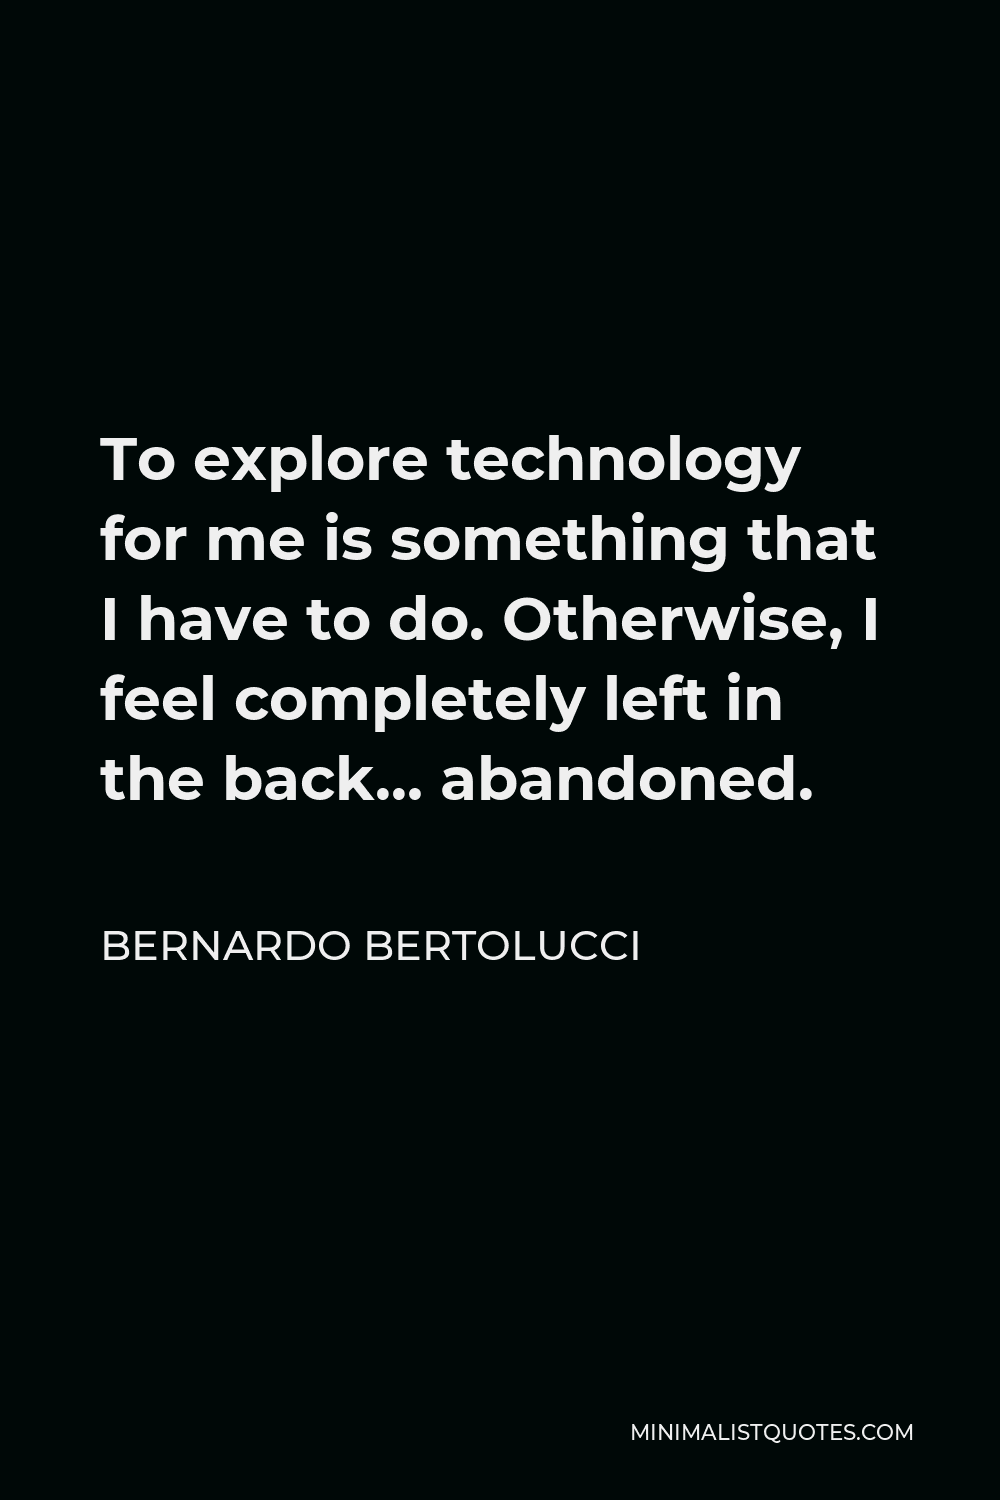 Bernardo Bertolucci Quote - To explore technology for me is something that I have to do. Otherwise, I feel completely left in the back… abandoned.